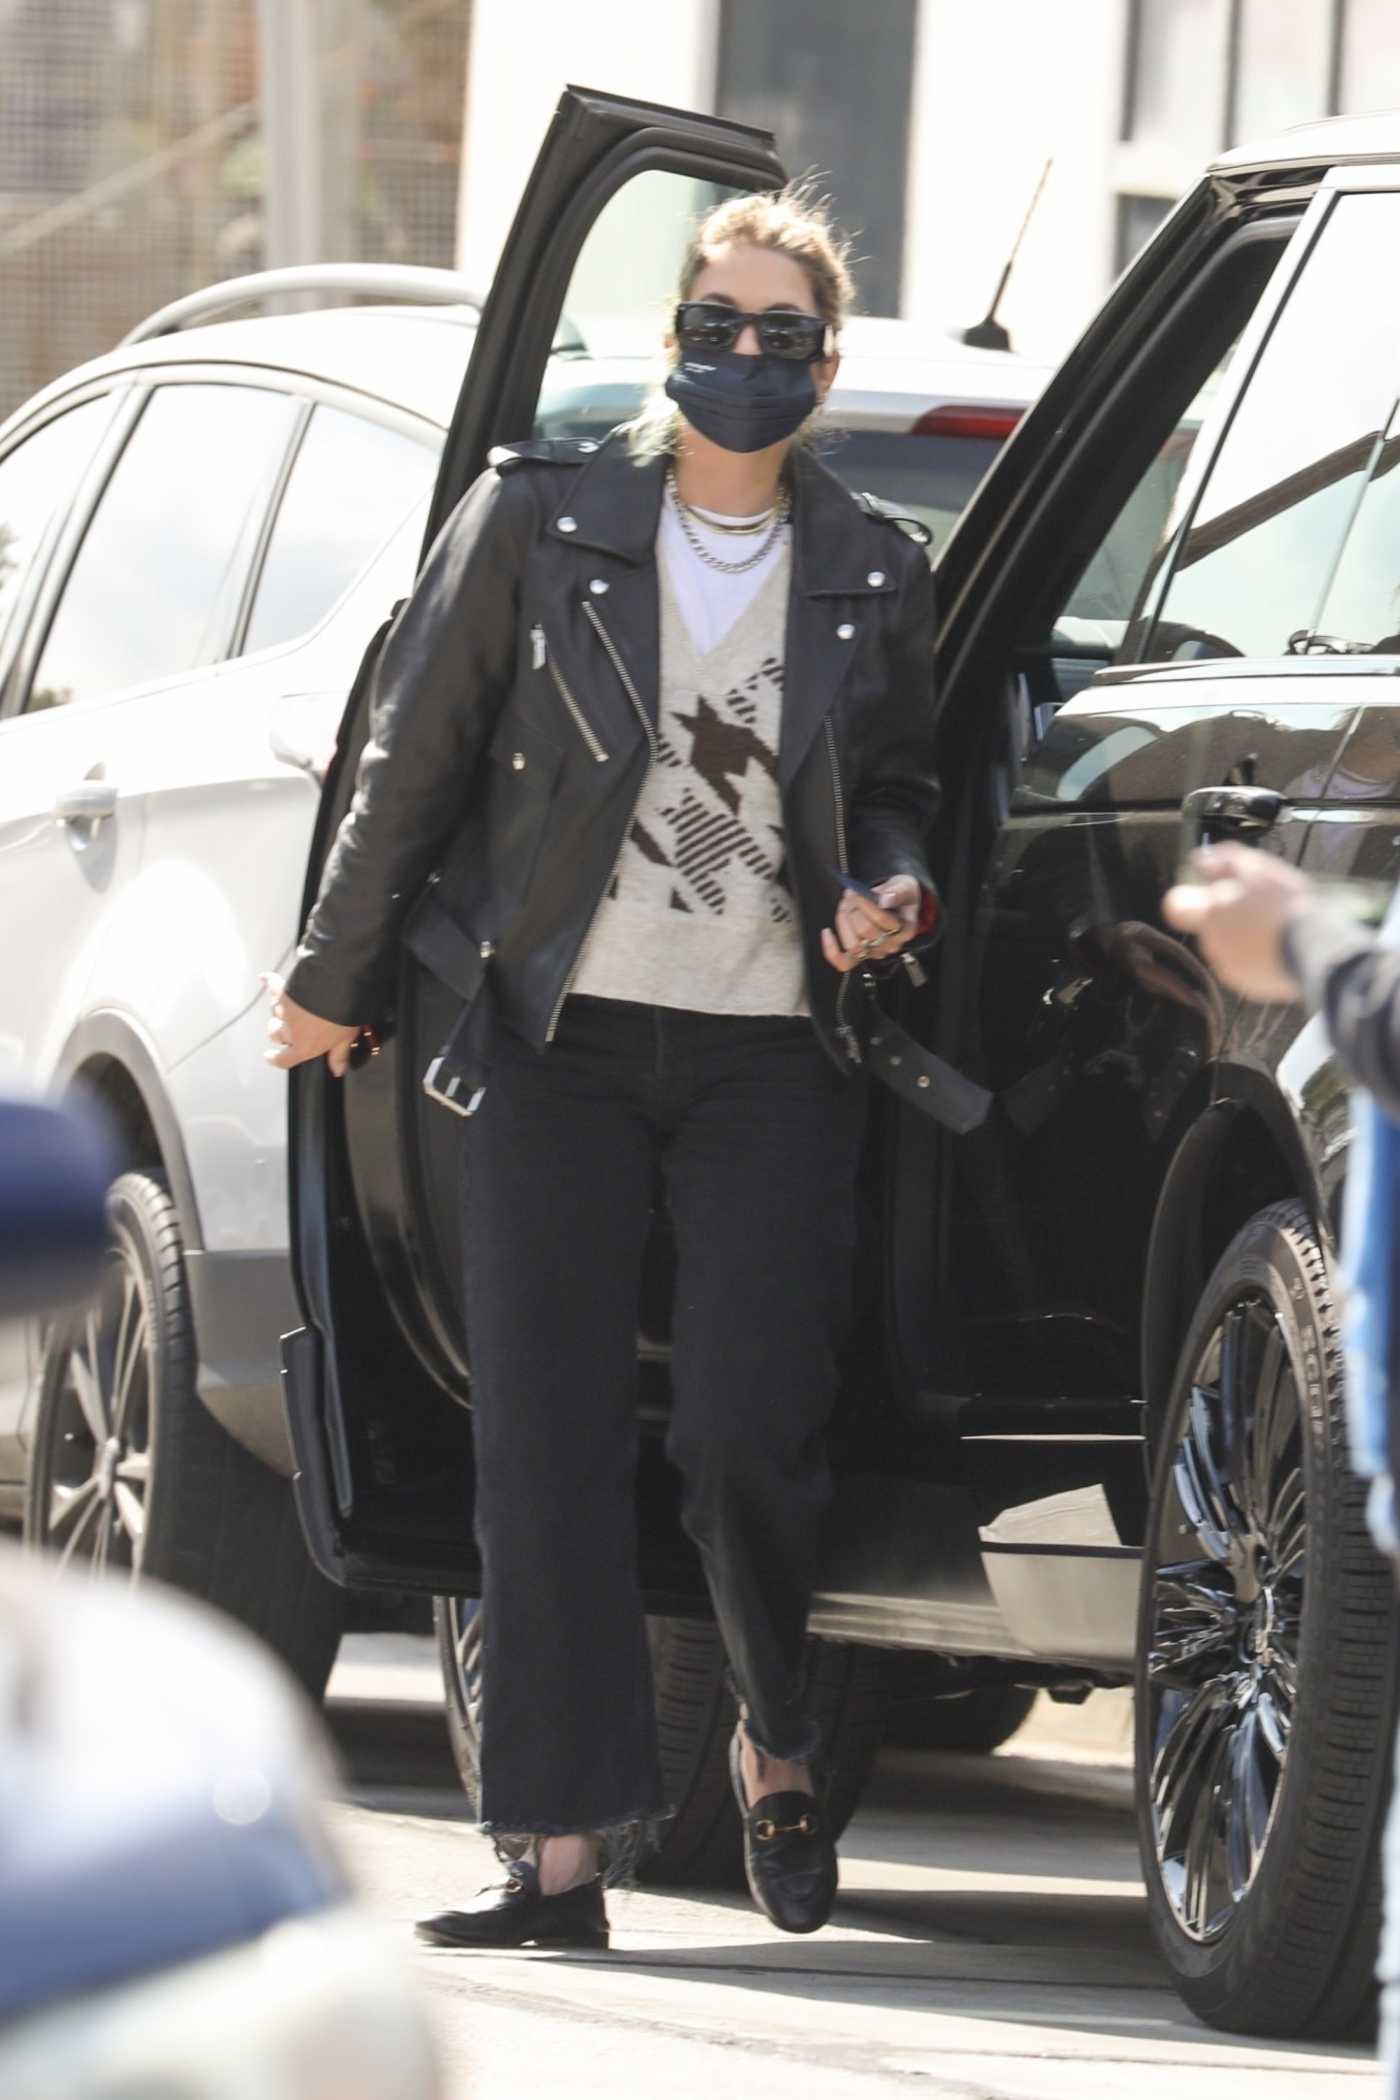 Ashley Benson in a Black Leather Jacket Arrives at the Hair Salon in West Hollywood 02/01/2022